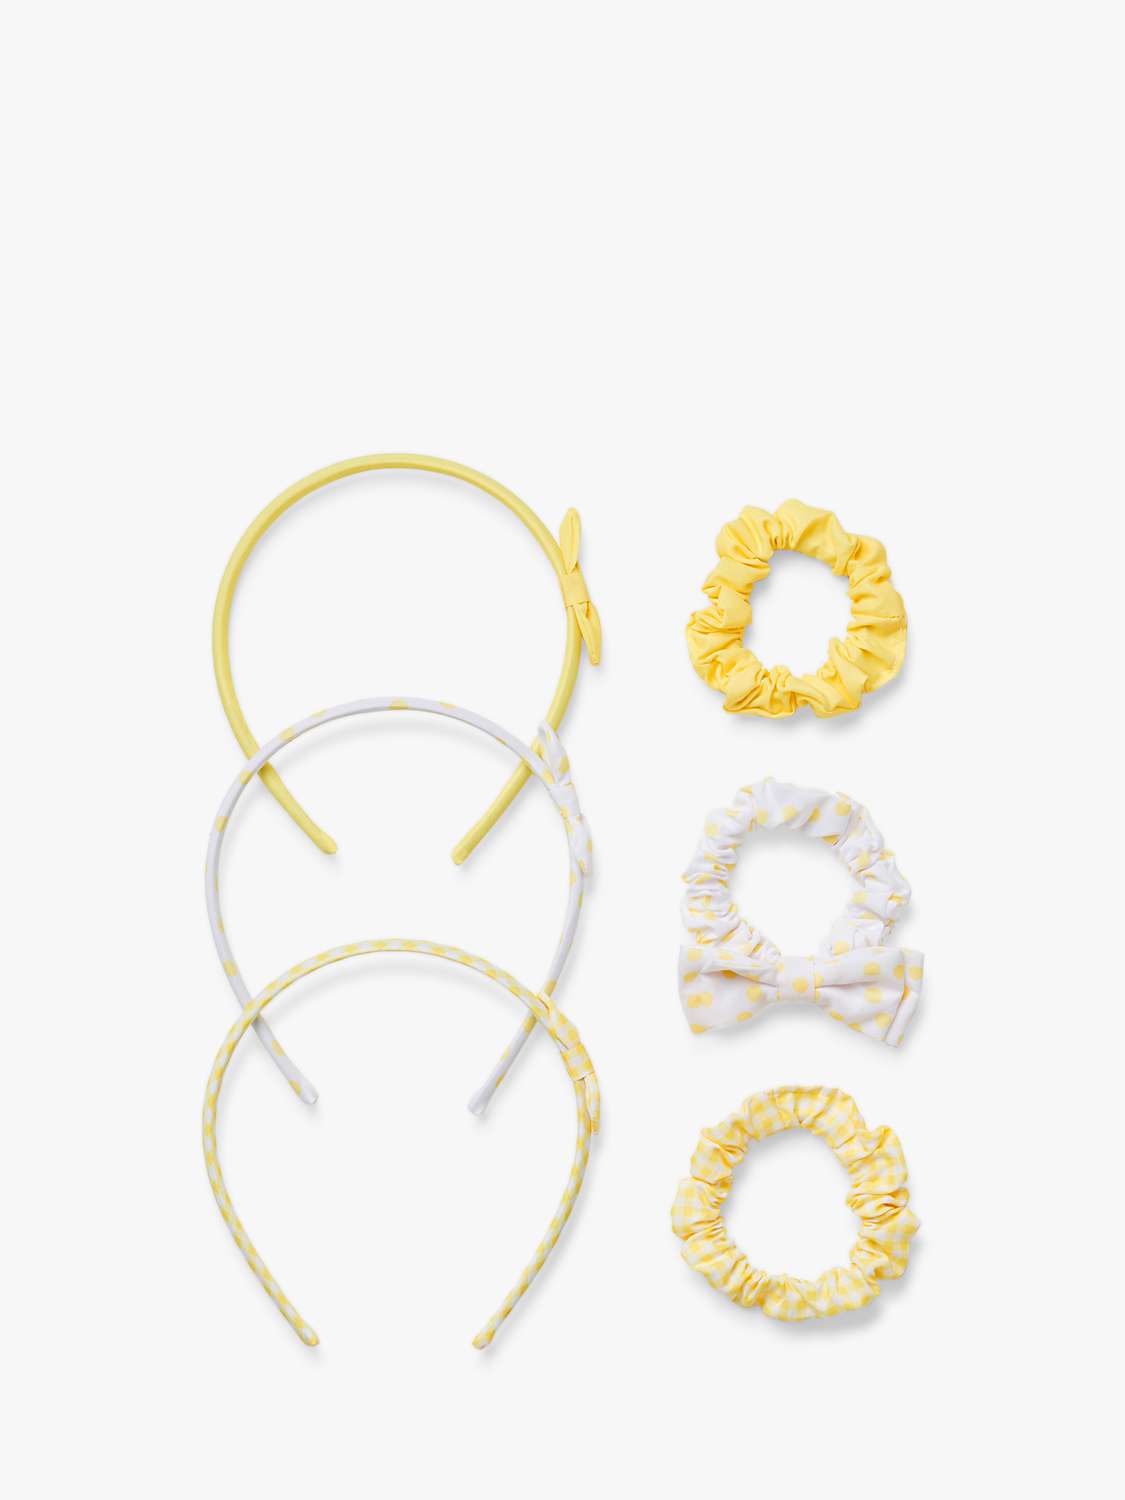 Buy Small Stuff Kids' Hair Band & Scrunchie Set, Pack of 6 Online at johnlewis.com